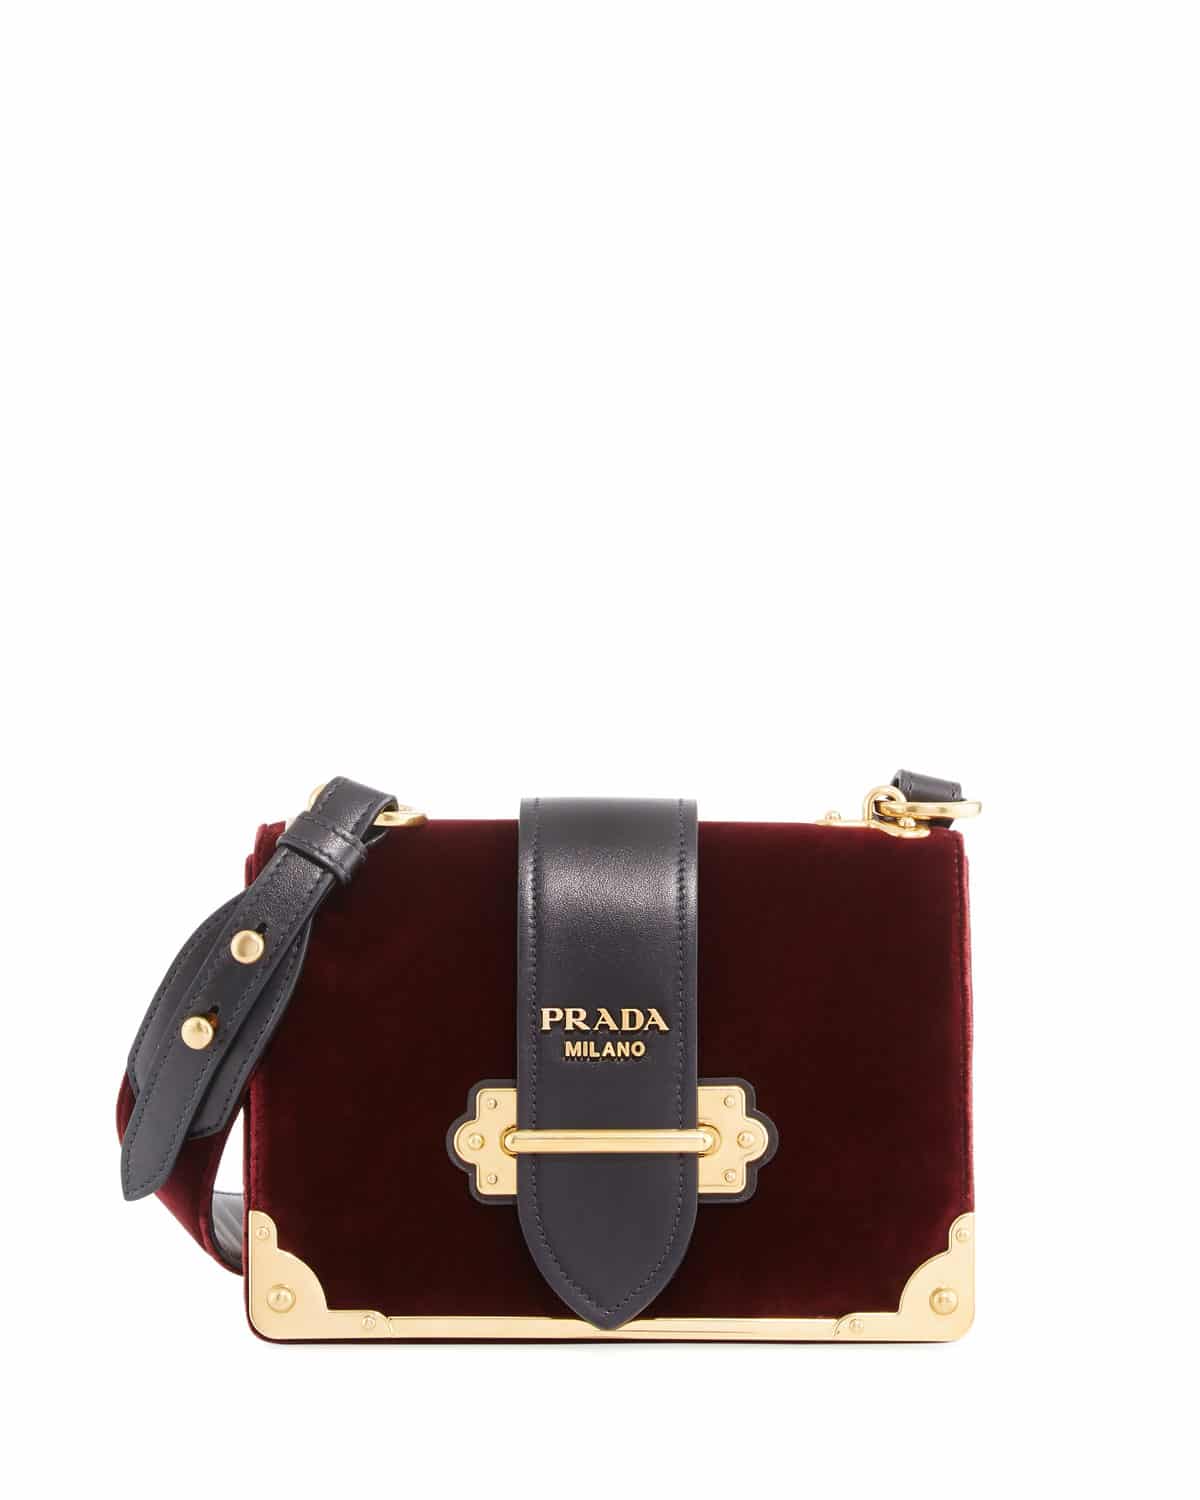 The Prada Cahier is the Effortlessly Cool Bag You Need This Fall